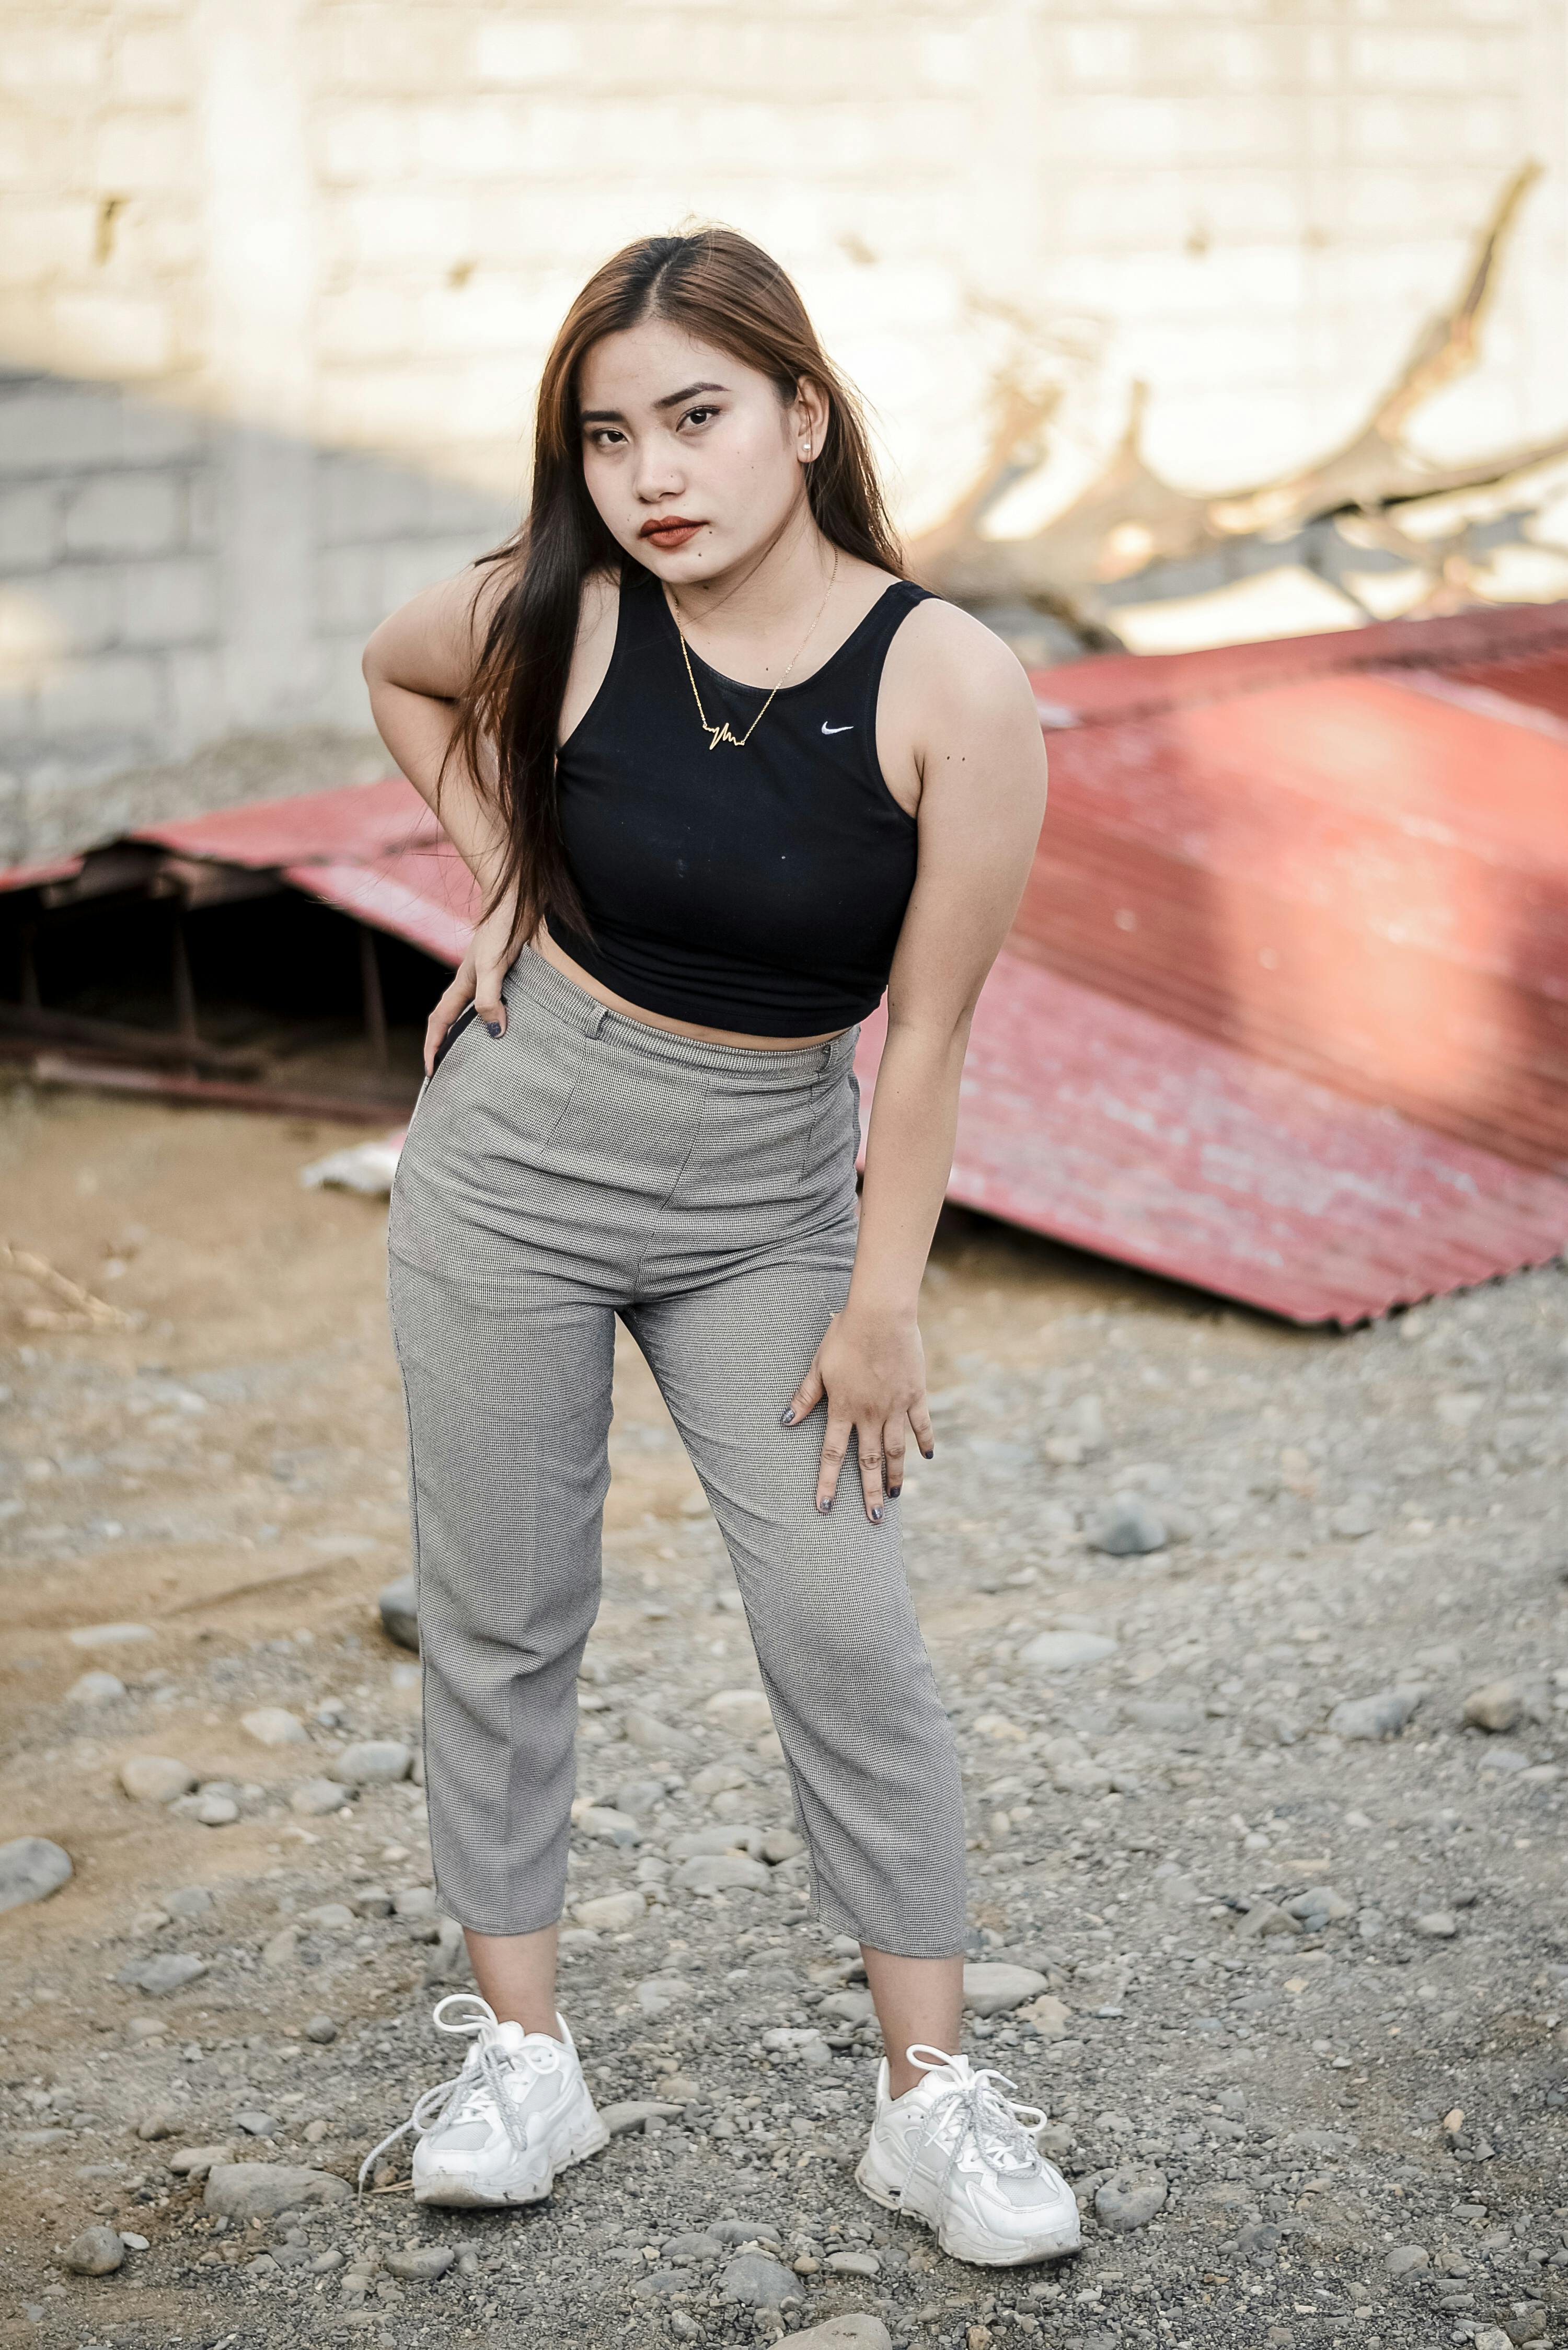 A Woman Wearing Crop Top and Gray Pants · Free Stock Photo